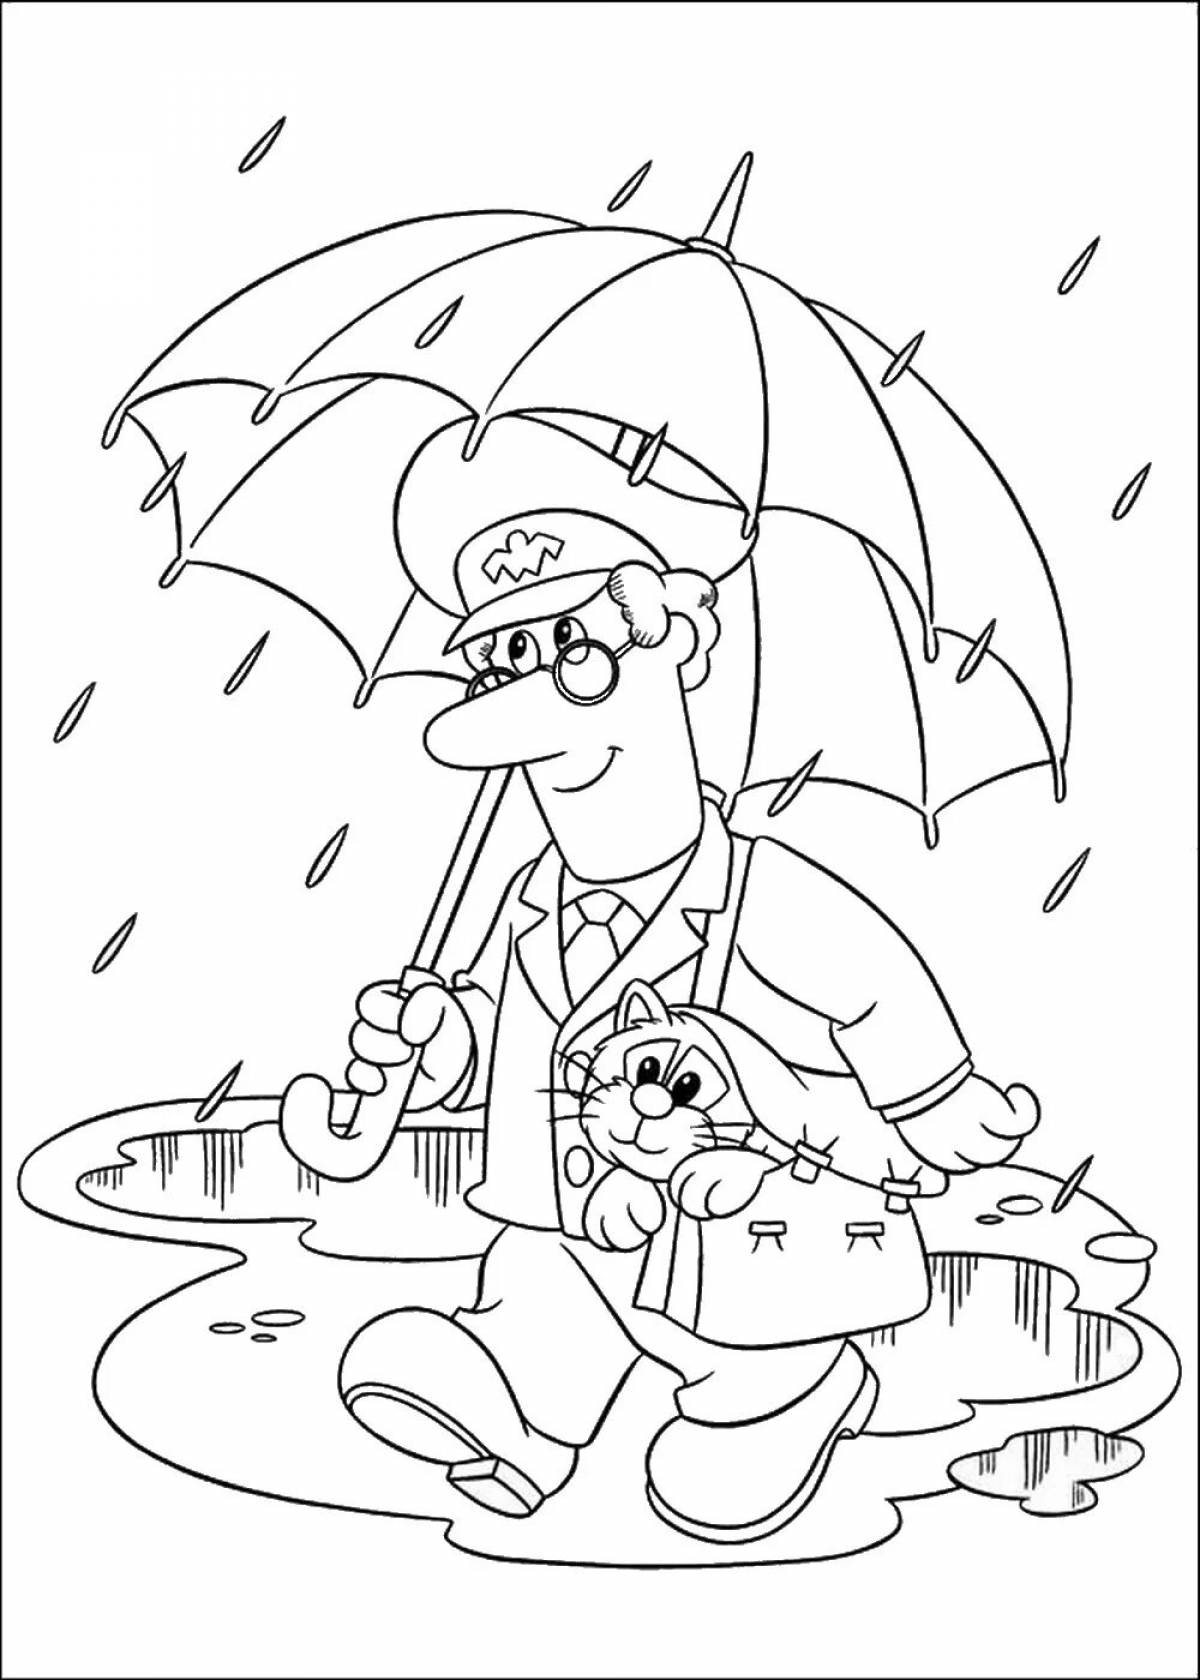 Color-bright postman coloring page for preschoolers